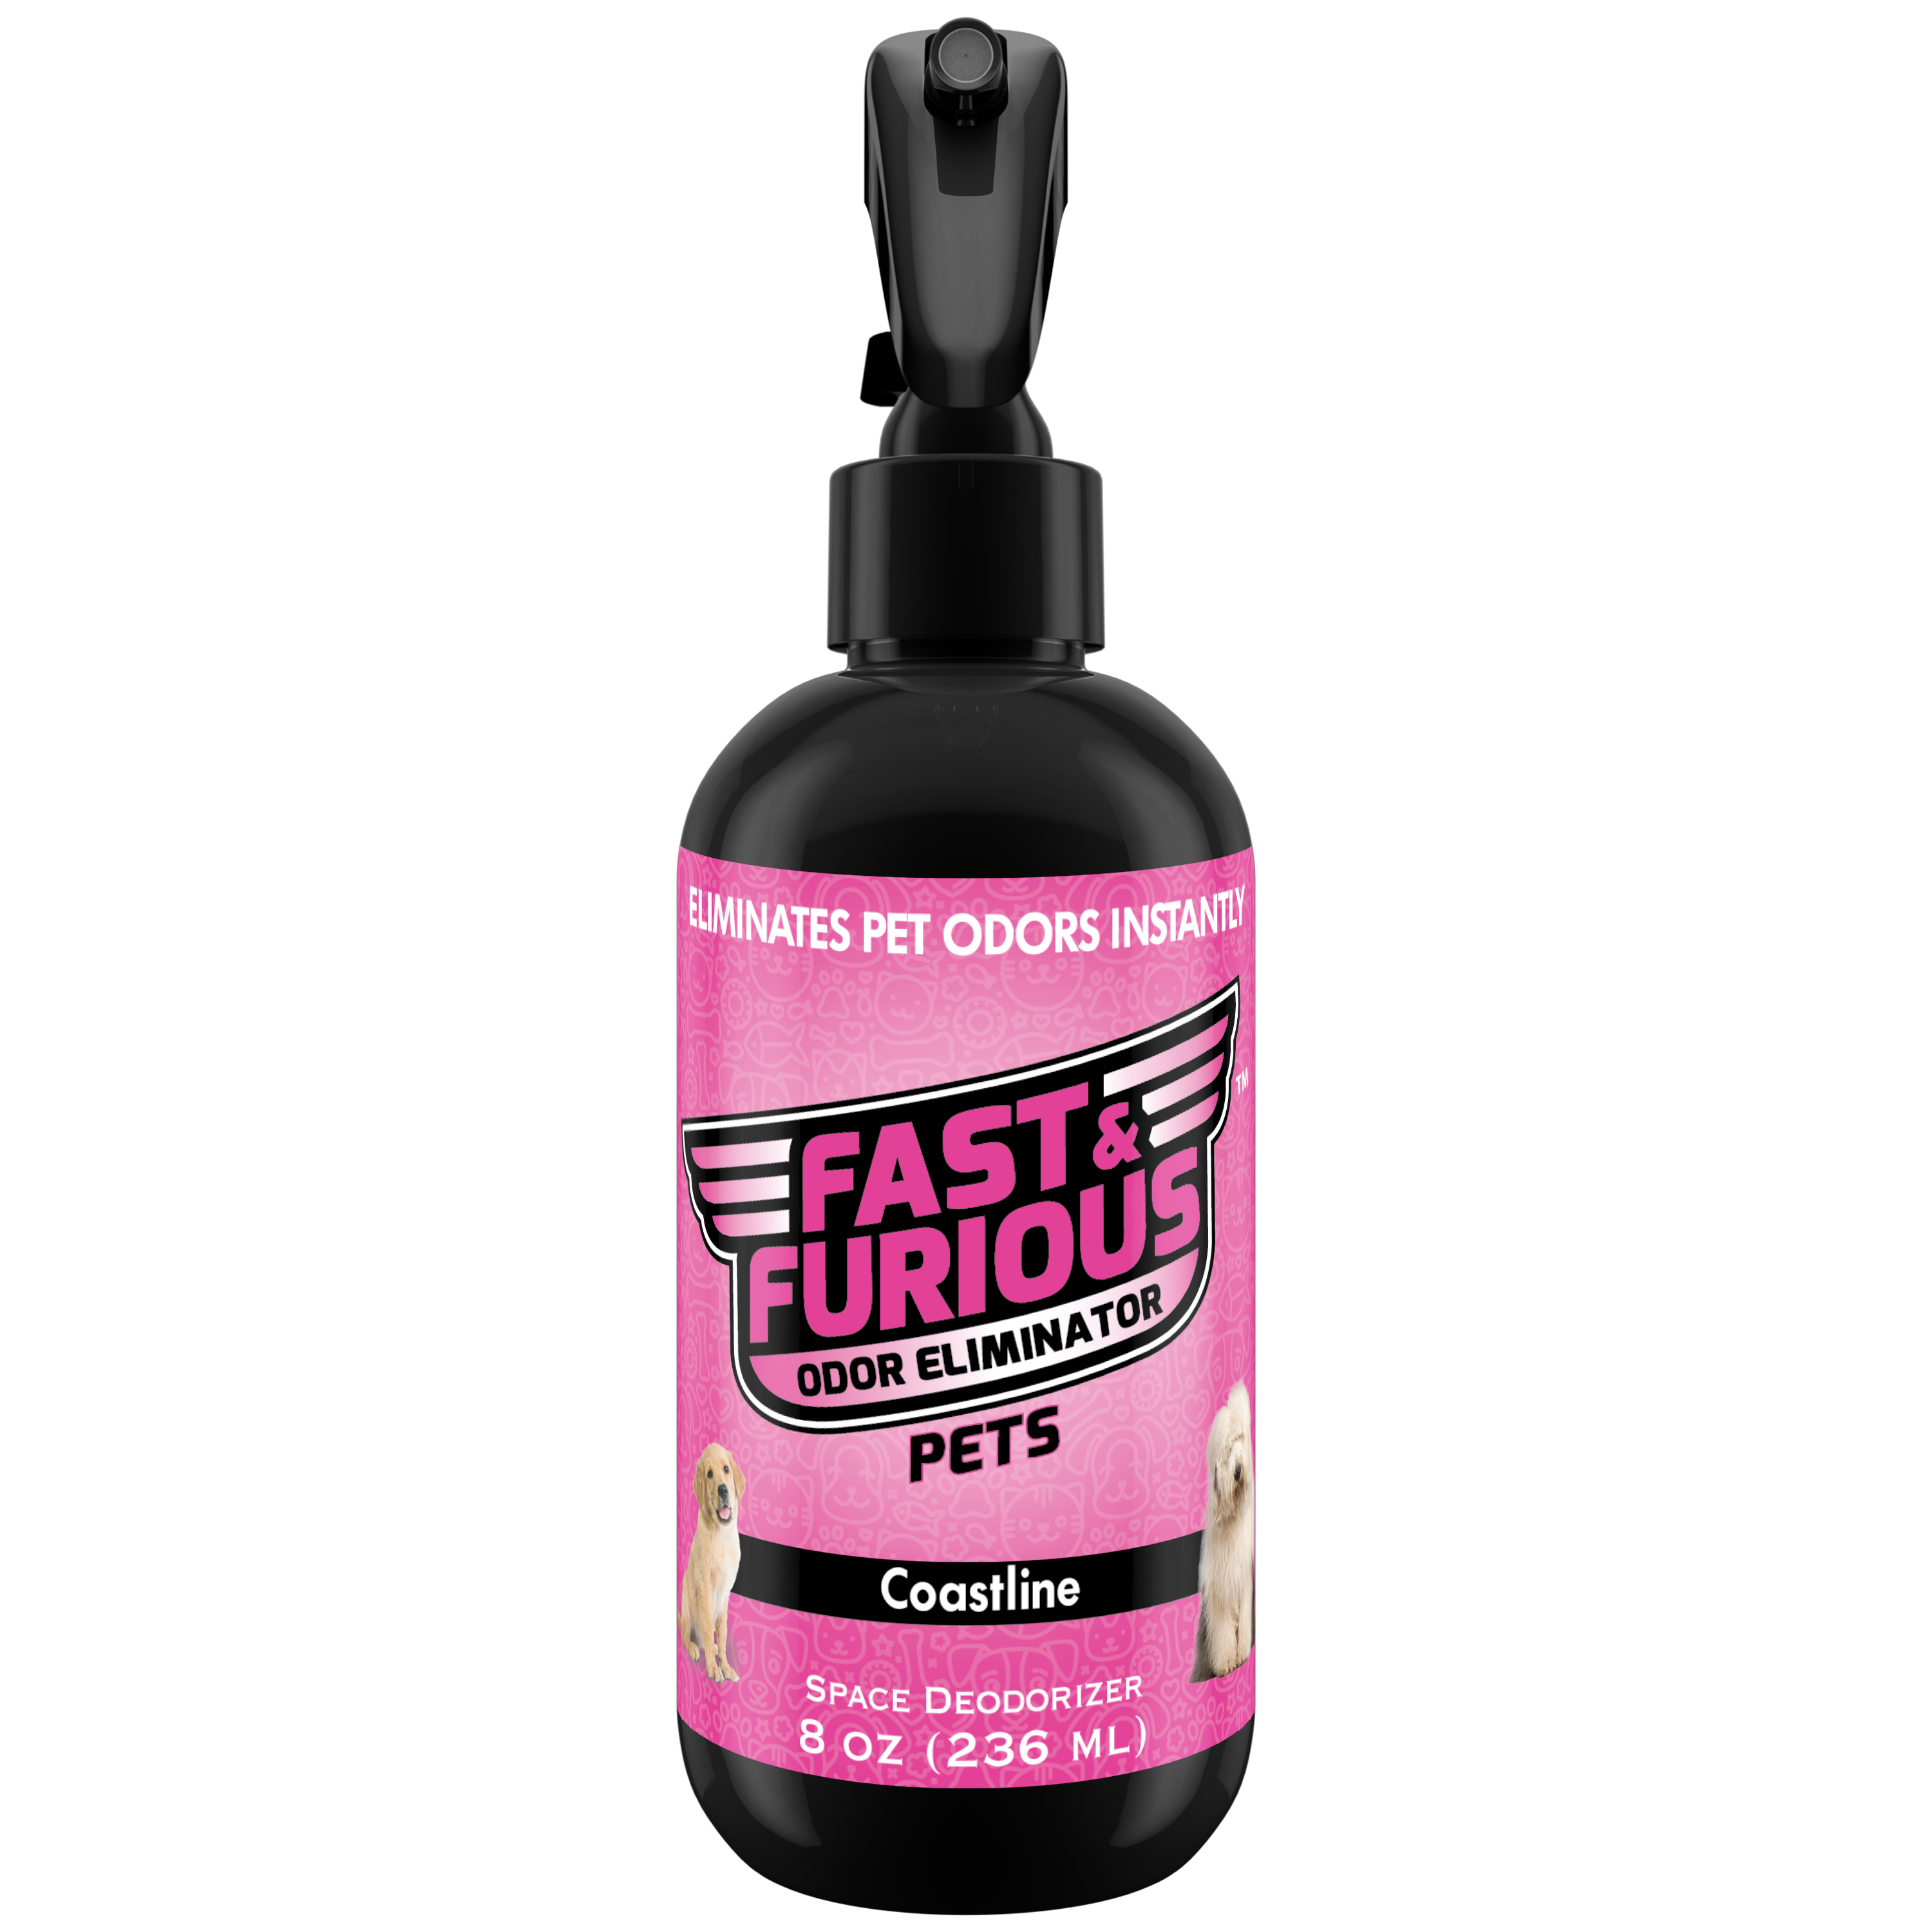 Fast and Furious Pets Odor Eliminator - Cotton Blossom Scent Size: 8oz